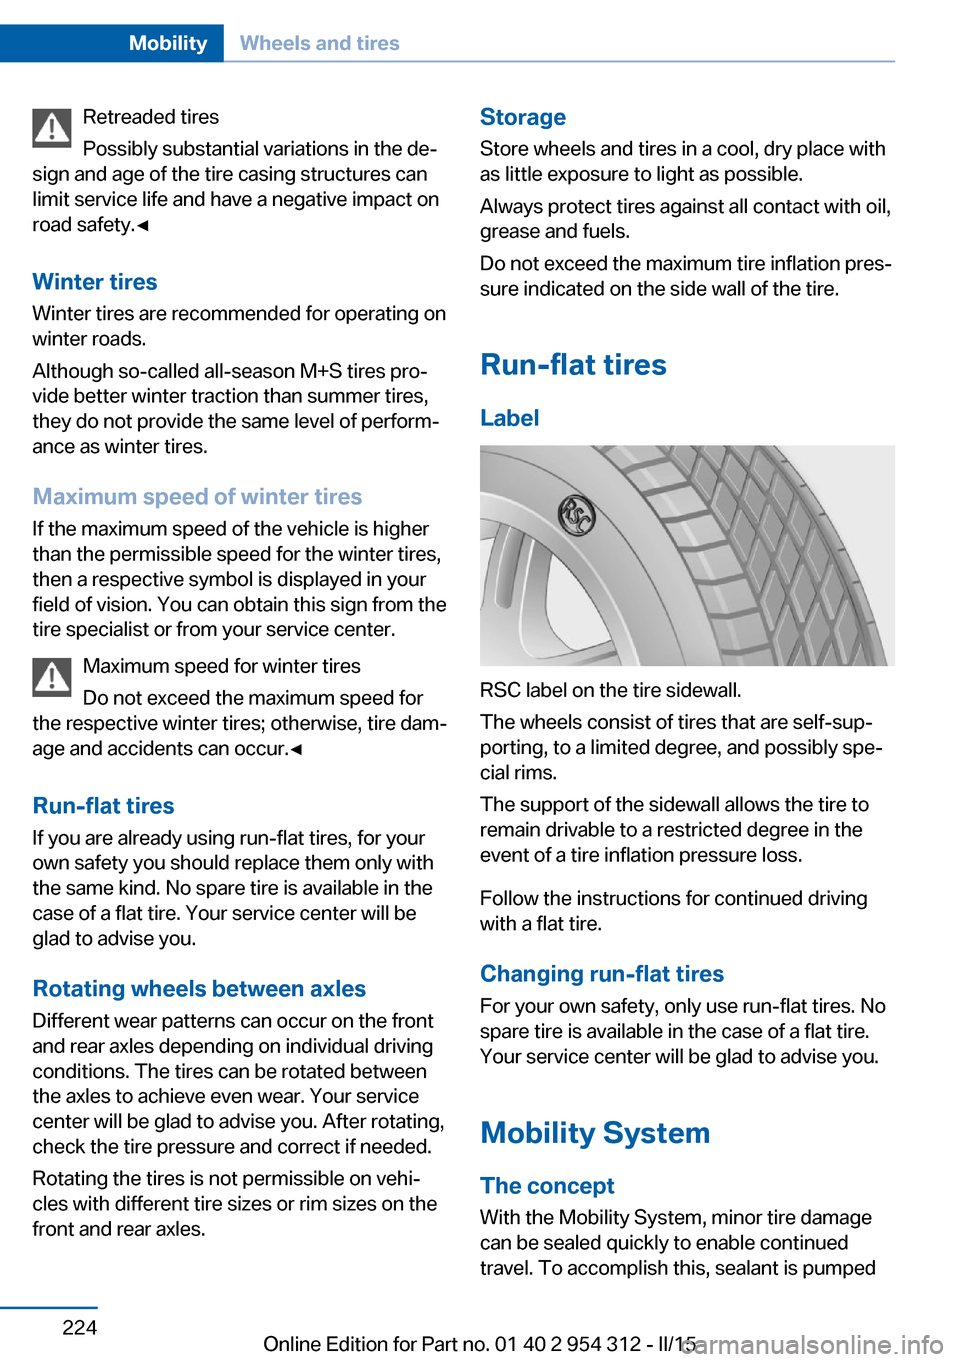 BMW 5 SERIES 2015 F10 Owners Manual Retreaded tires
Possibly substantial variations in the de‐
sign and age of the tire casing structures can
limit service life and have a negative impact on
road safety.◀
Winter tires
Winter tires a